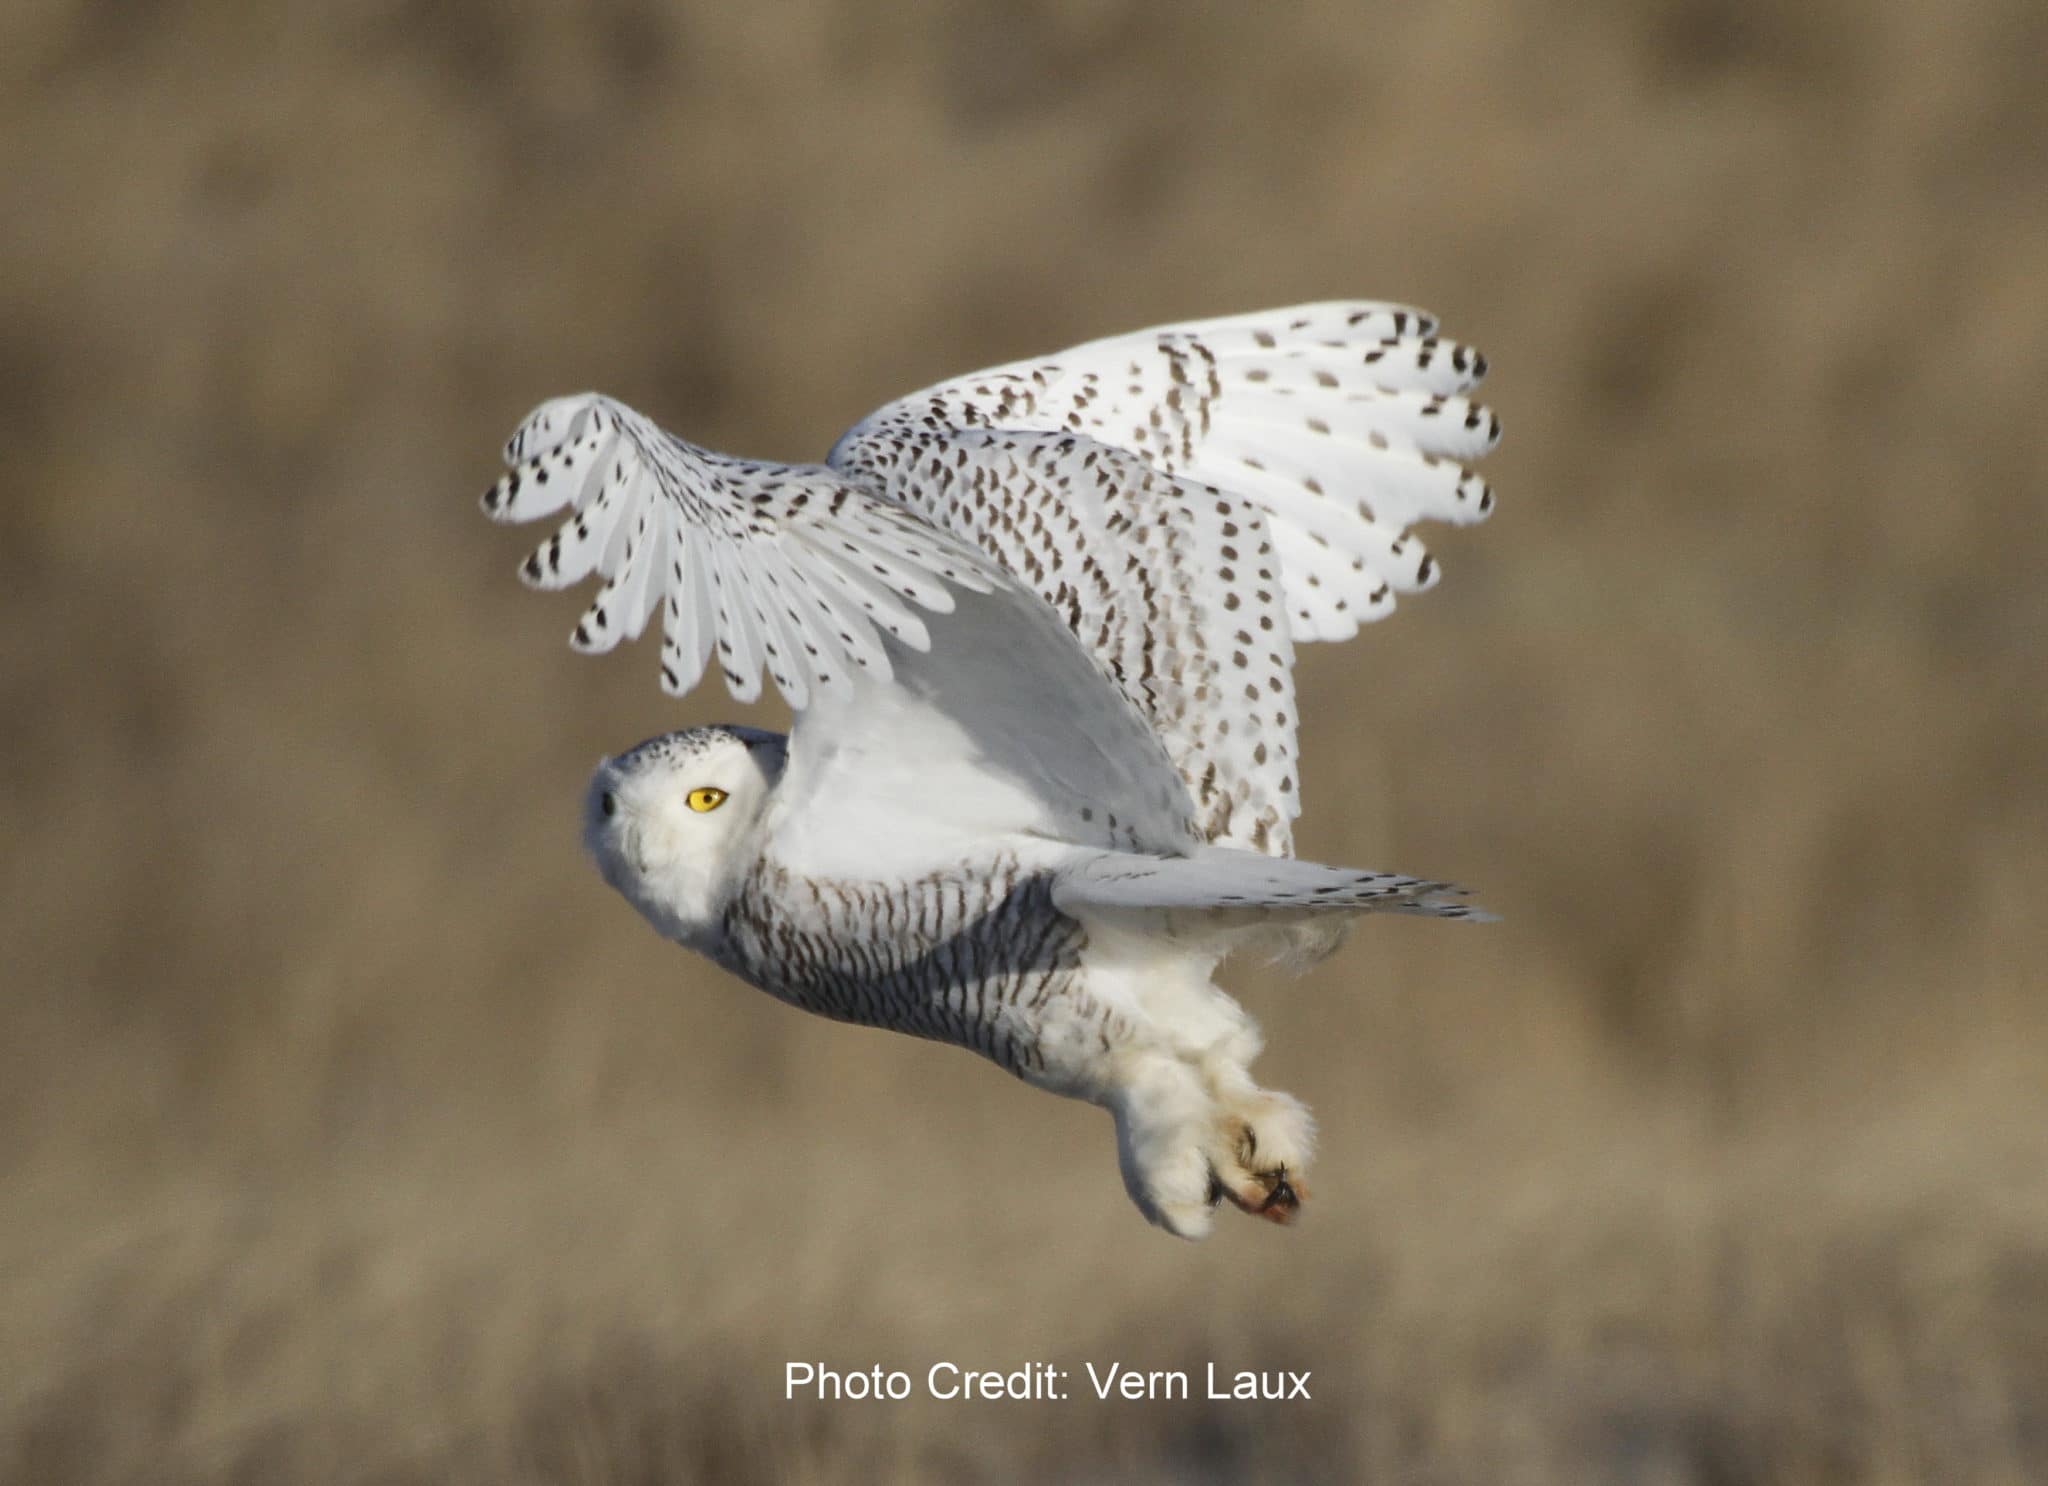 It’s Snowing Snowy Owls! | Nantucket Conservation Foundation